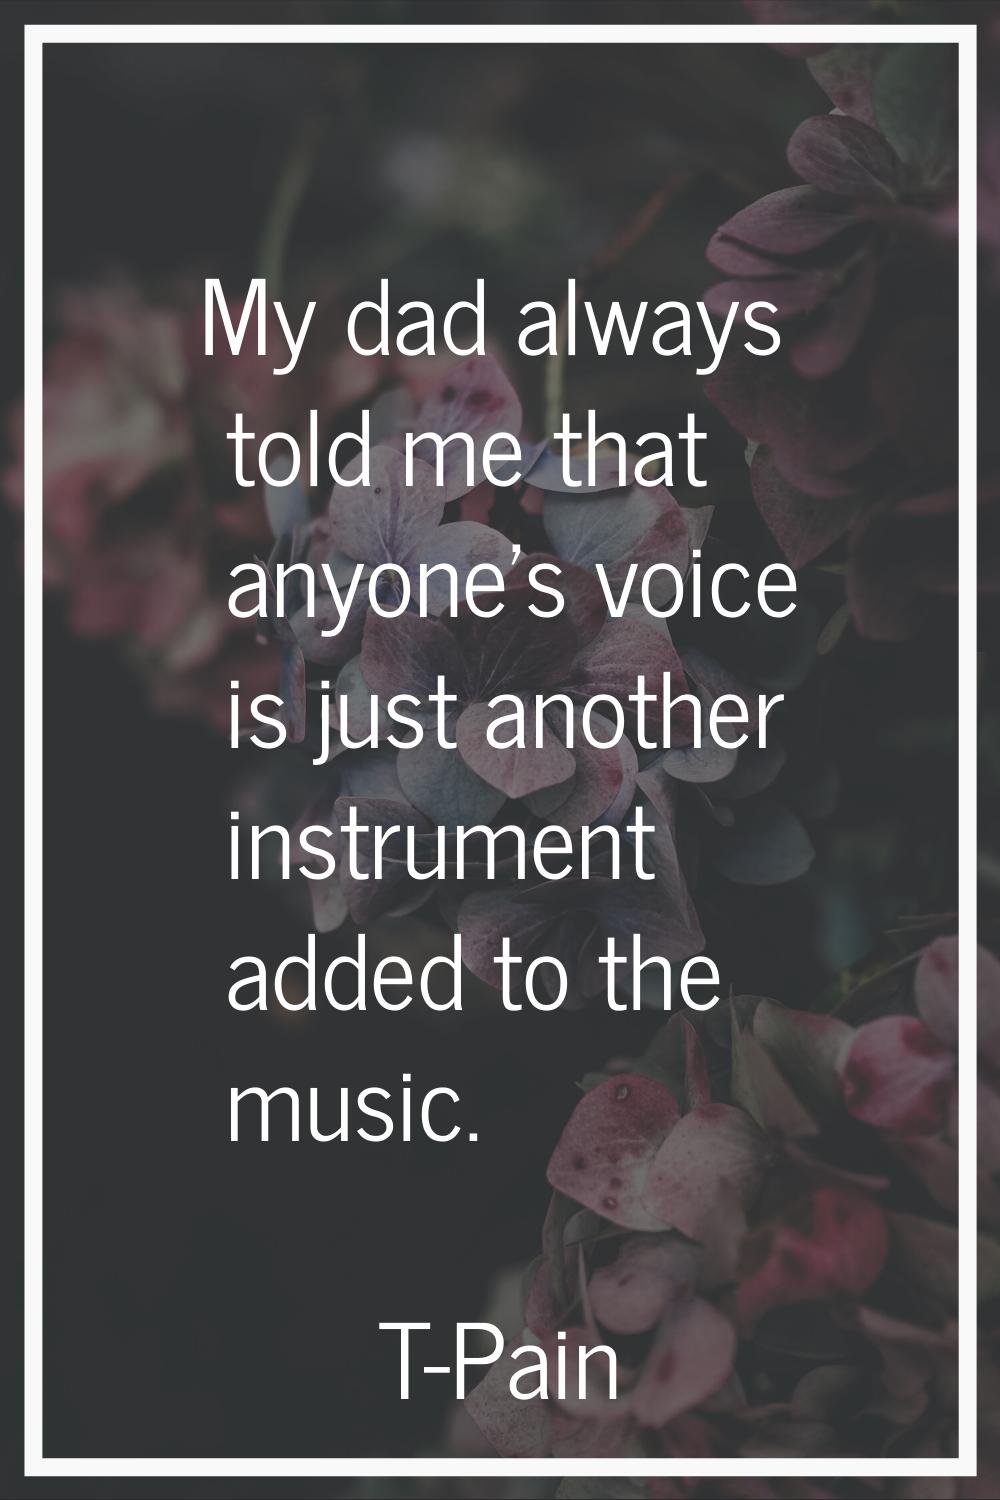 My dad always told me that anyone's voice is just another instrument added to the music.